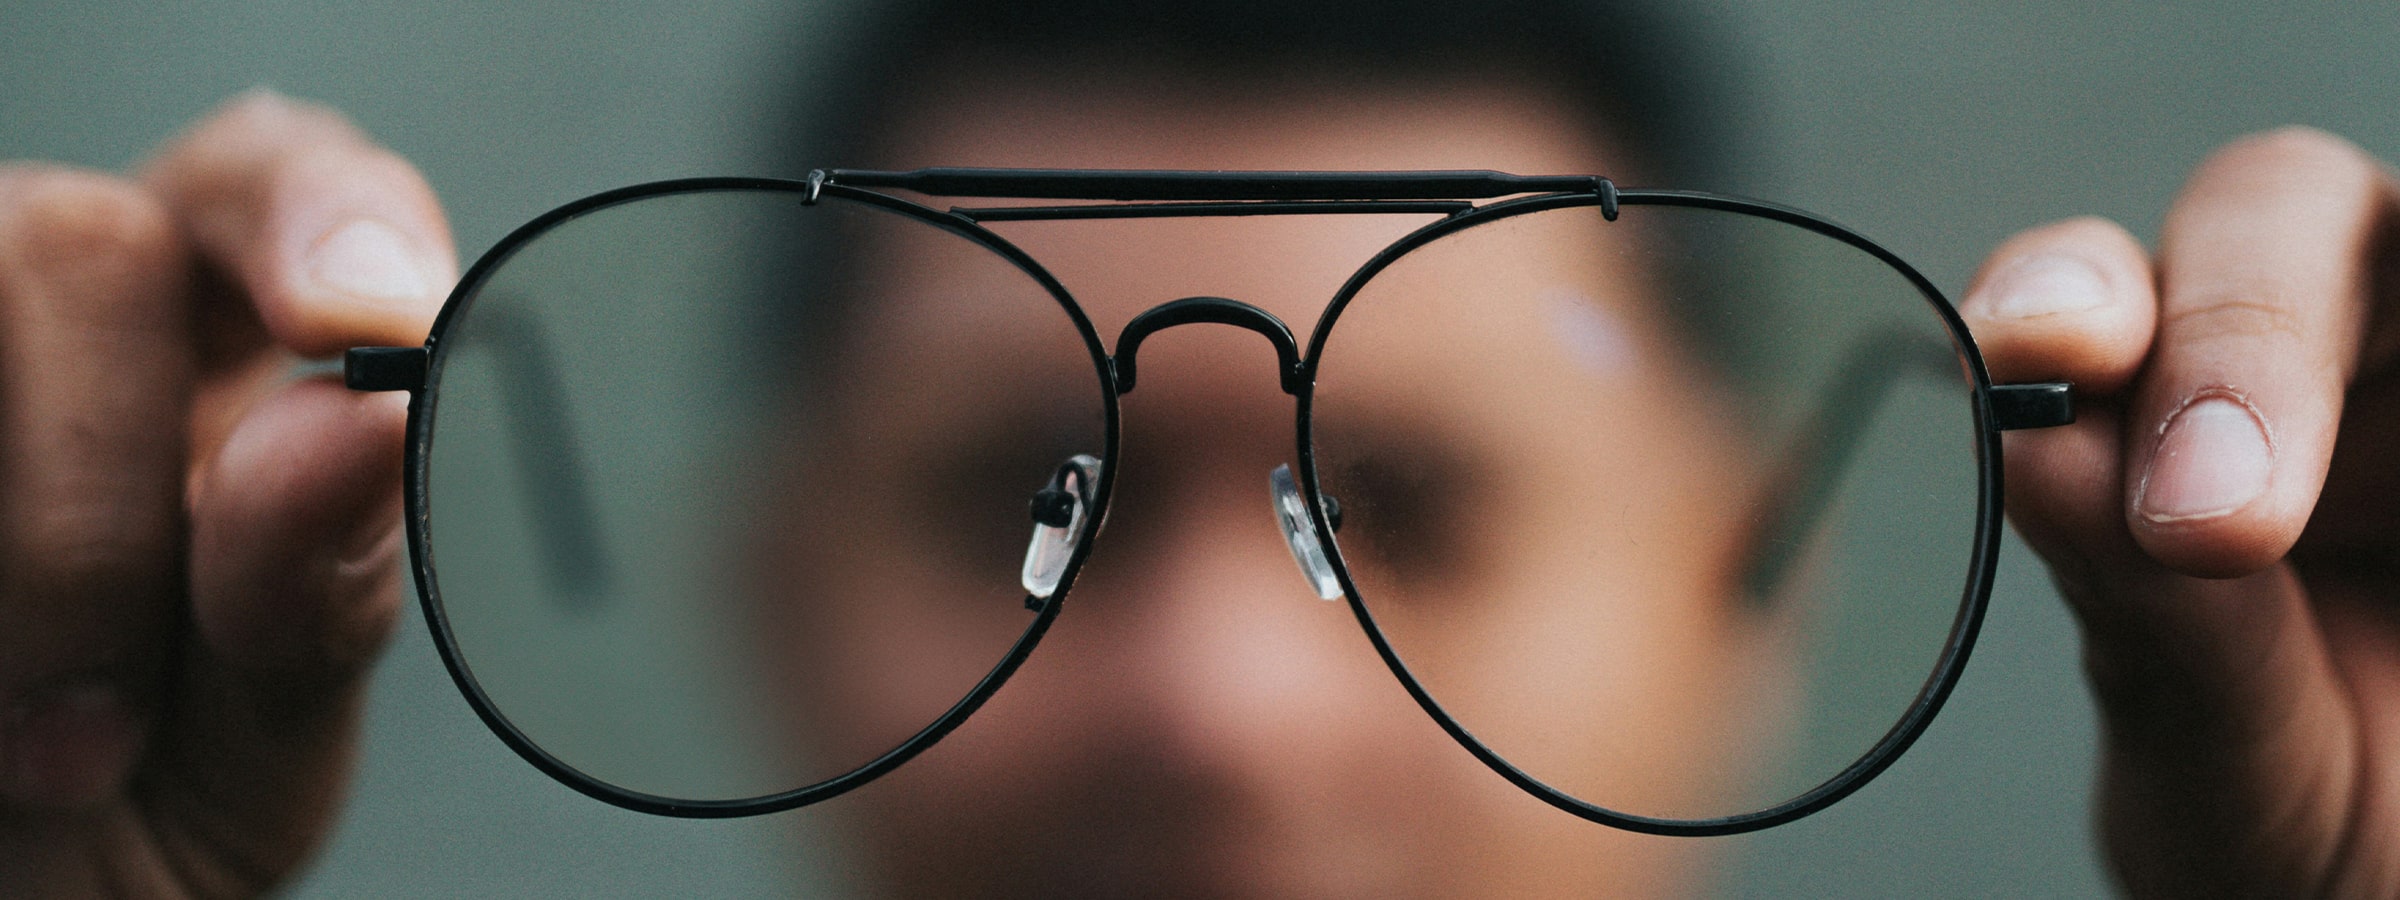 Blurry image of a man holding up a pair of glasses